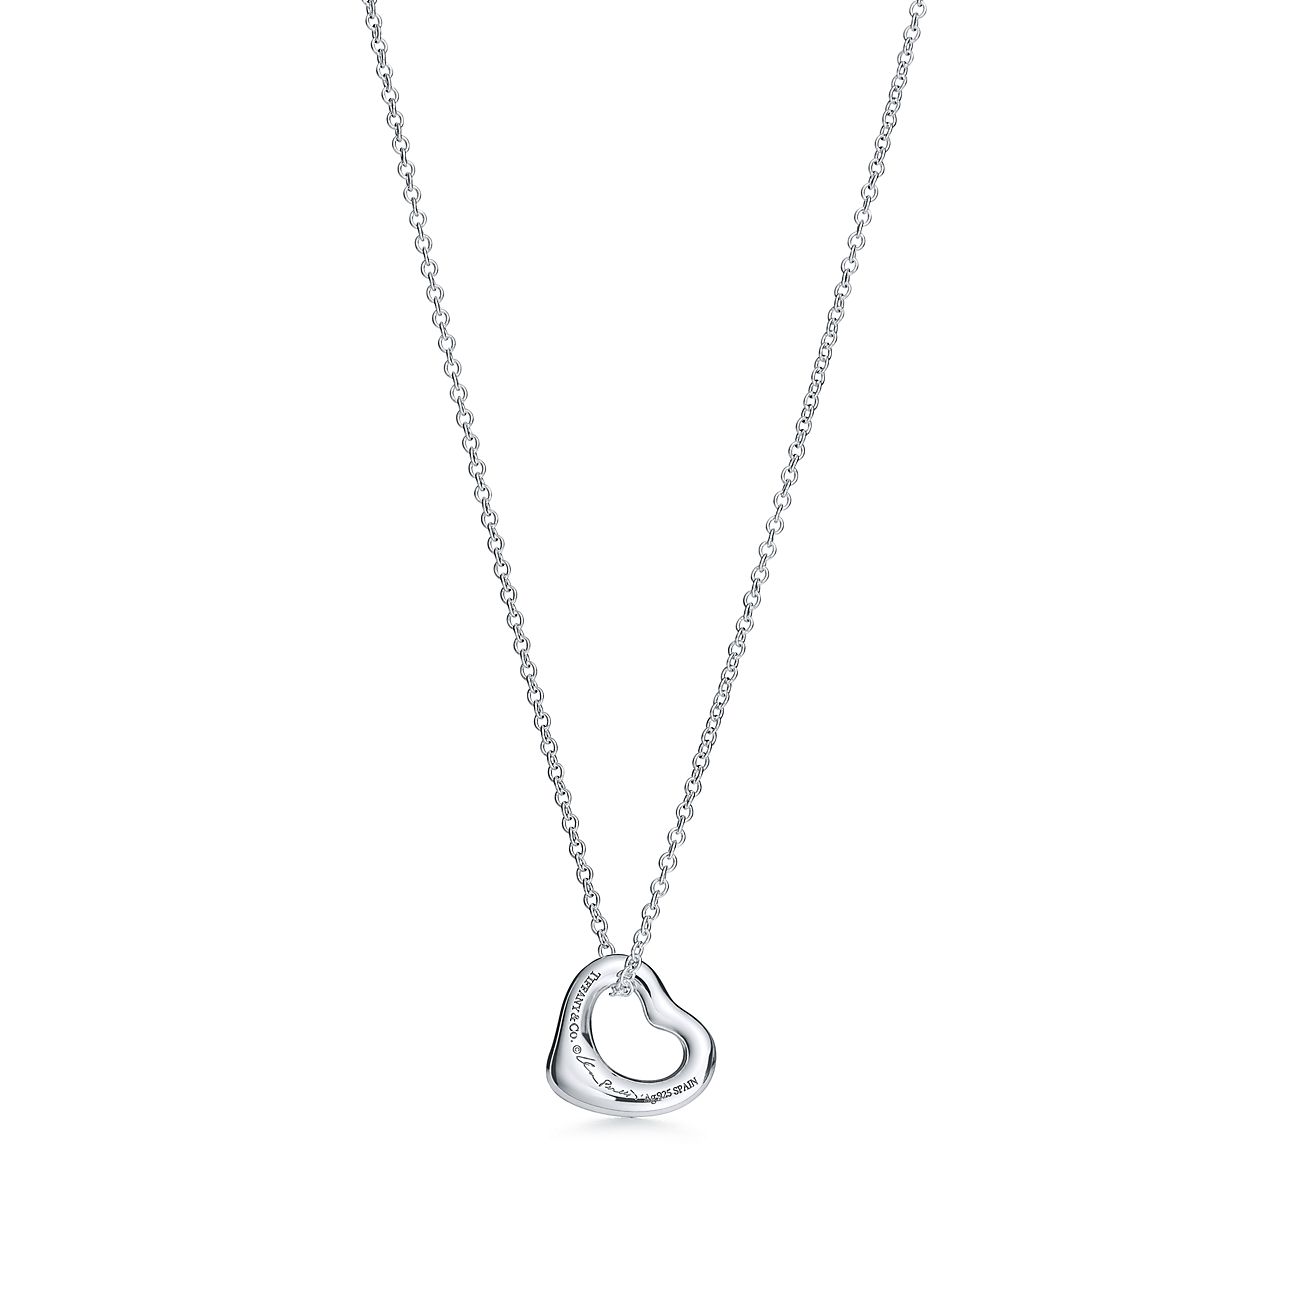 Wearing Tiffany Open Heart Necklace - For Sale on 1stDibs